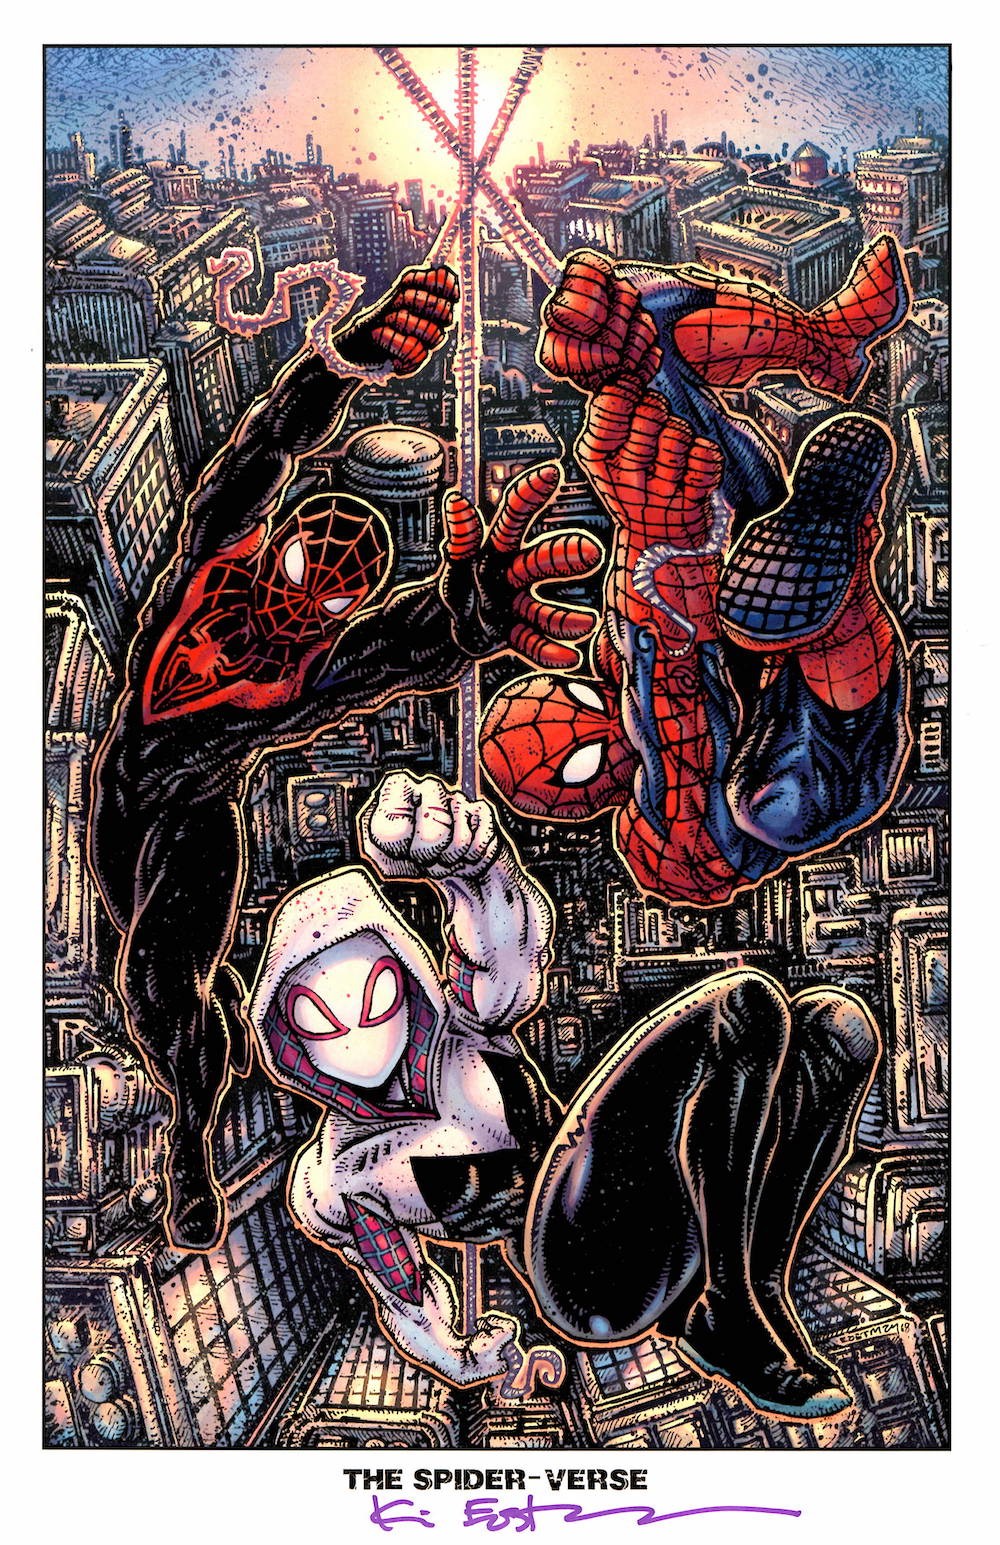 The Spider-Verse – Signed Print